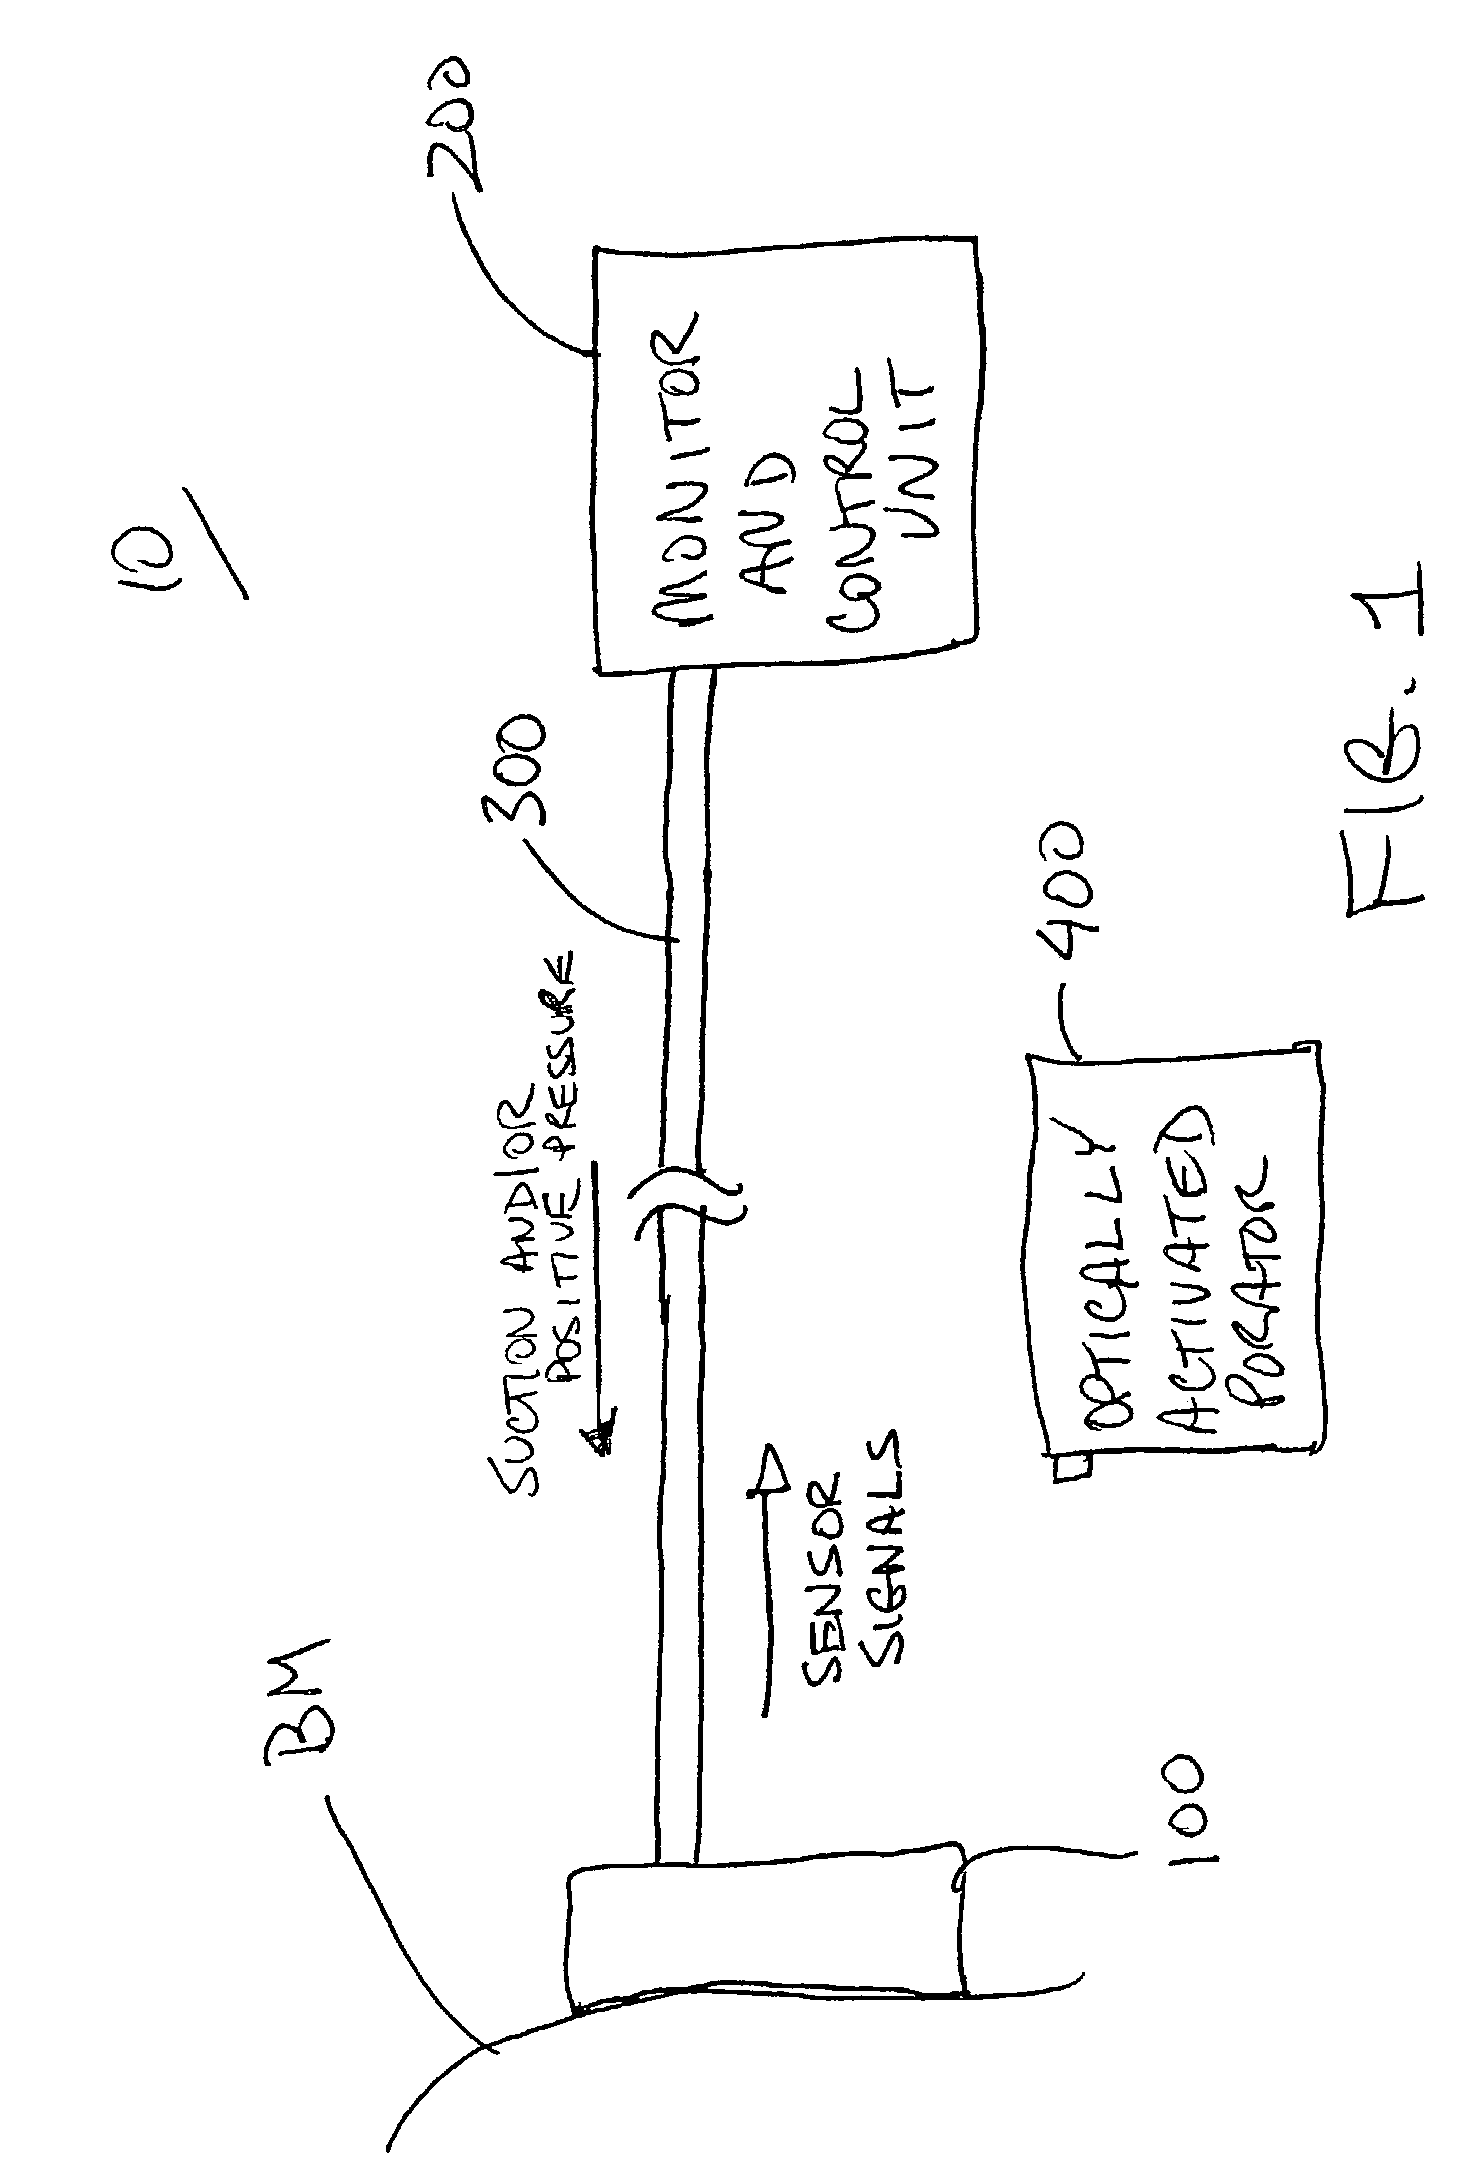 System and method for continuous analyte monitoring